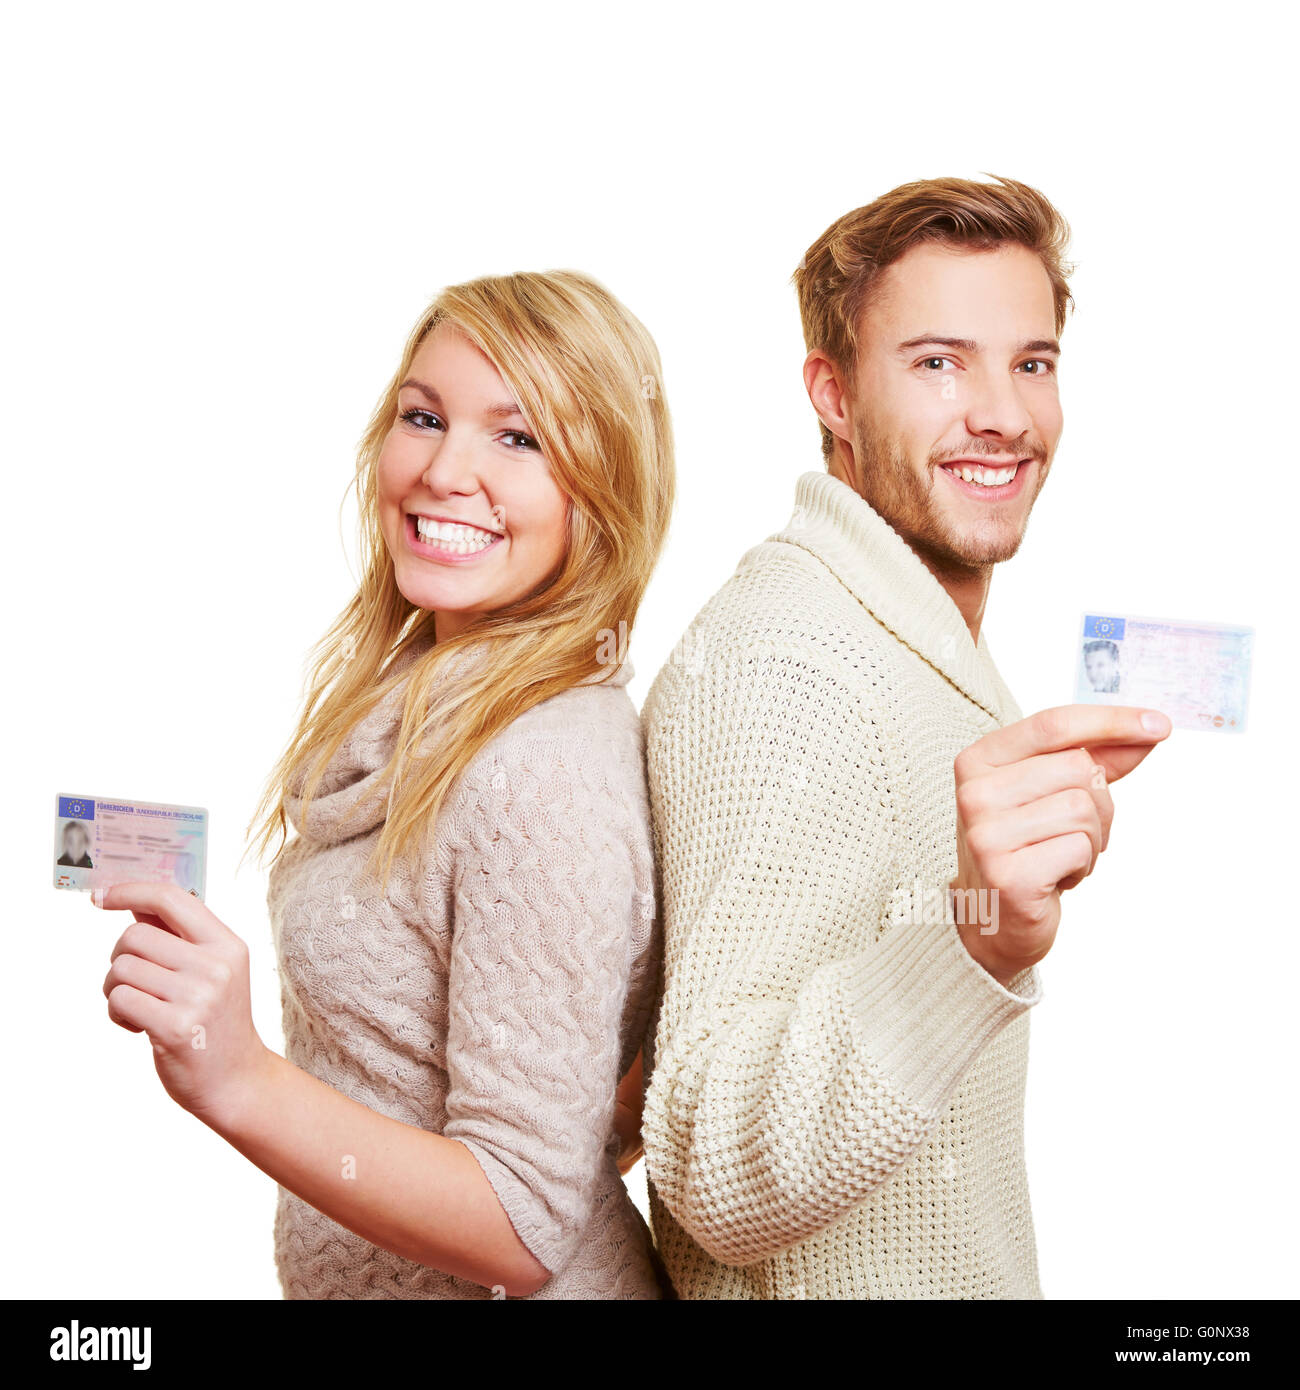 Young happy couple with their new European driving licence Stock Photo